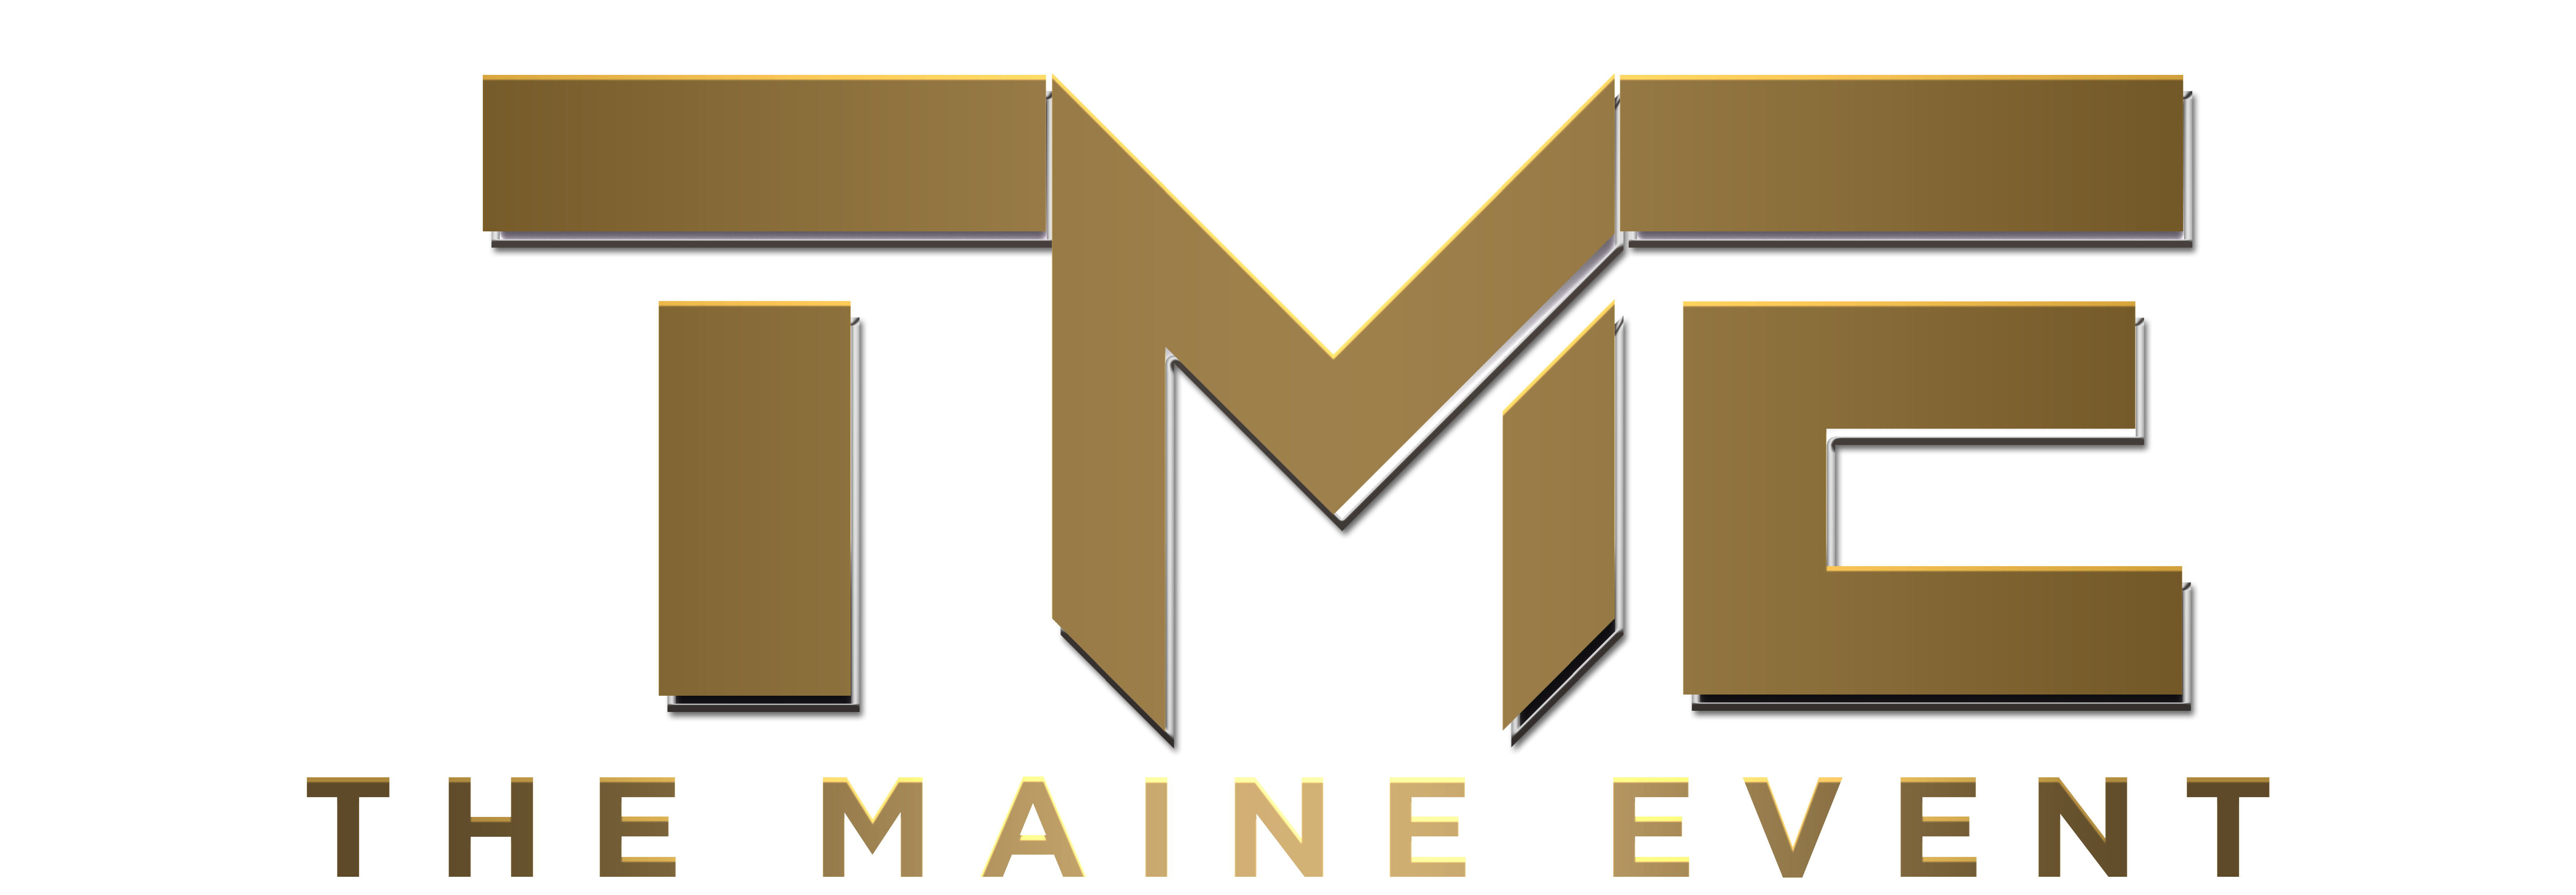 The Maine Event